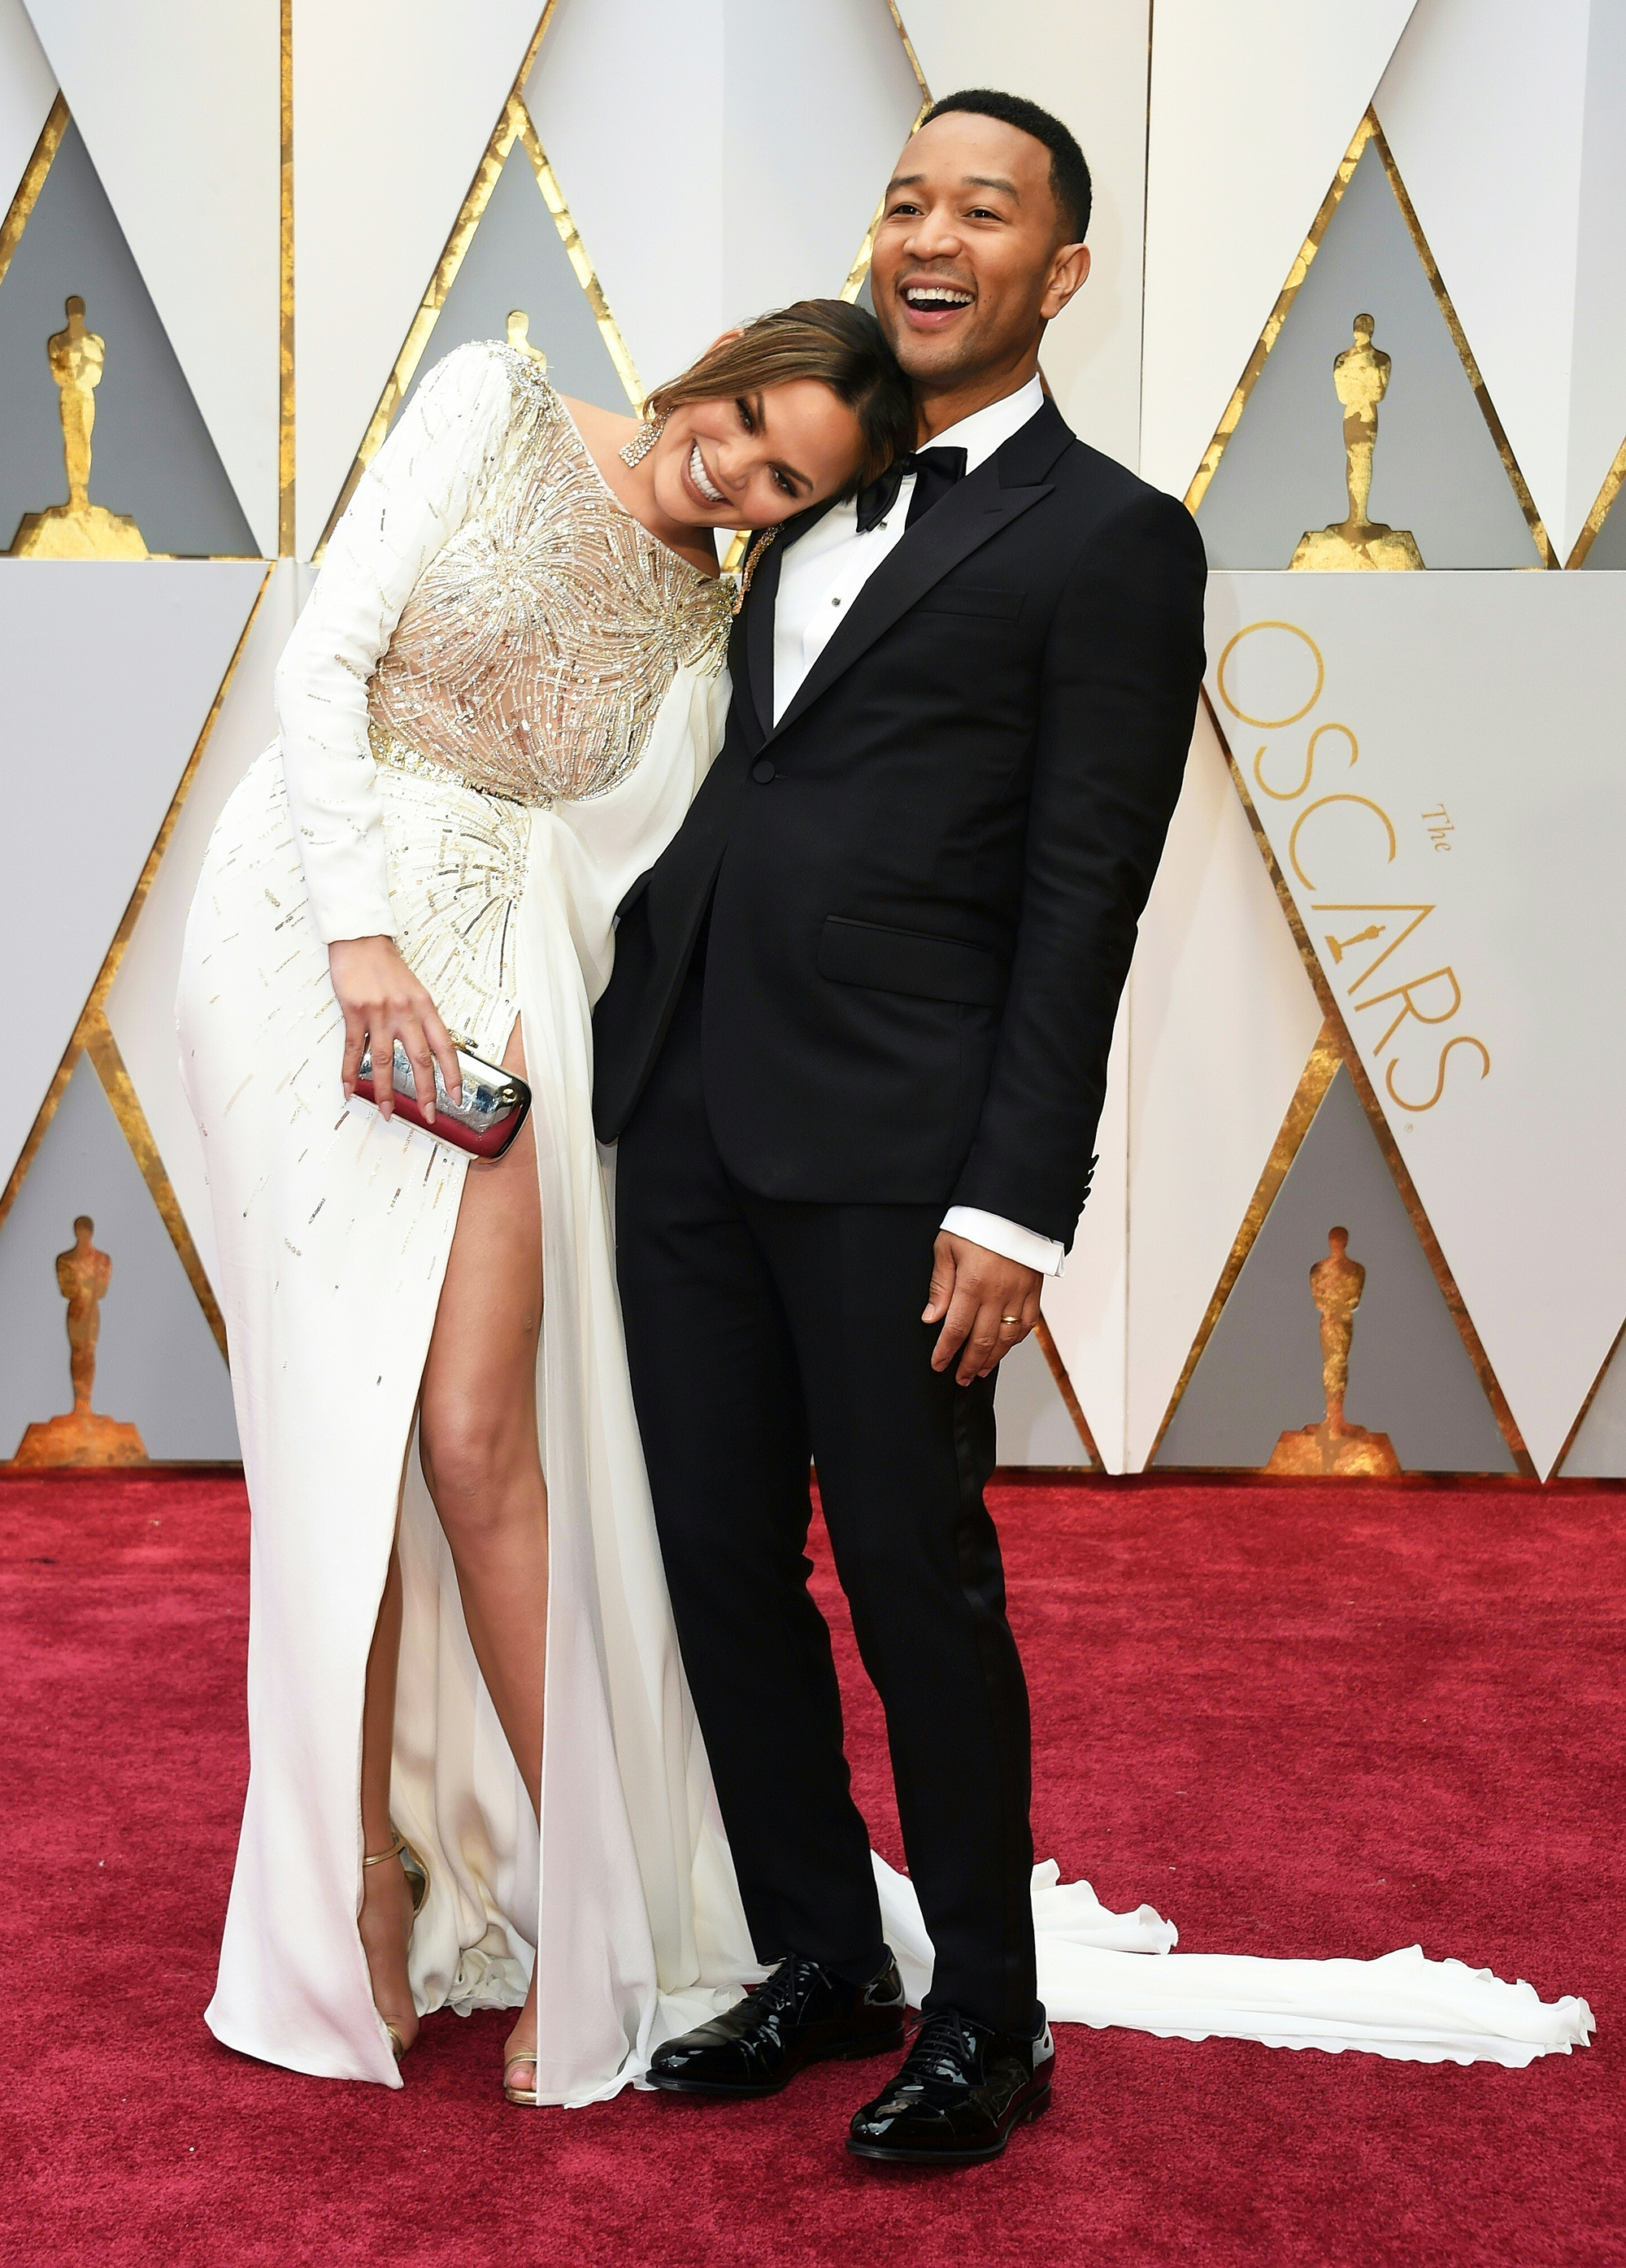 John Legend and Chrissy Teigen on the red carpet for the 89th Oscars, on Feb. 26, 2017 in Hollywood, Calif.